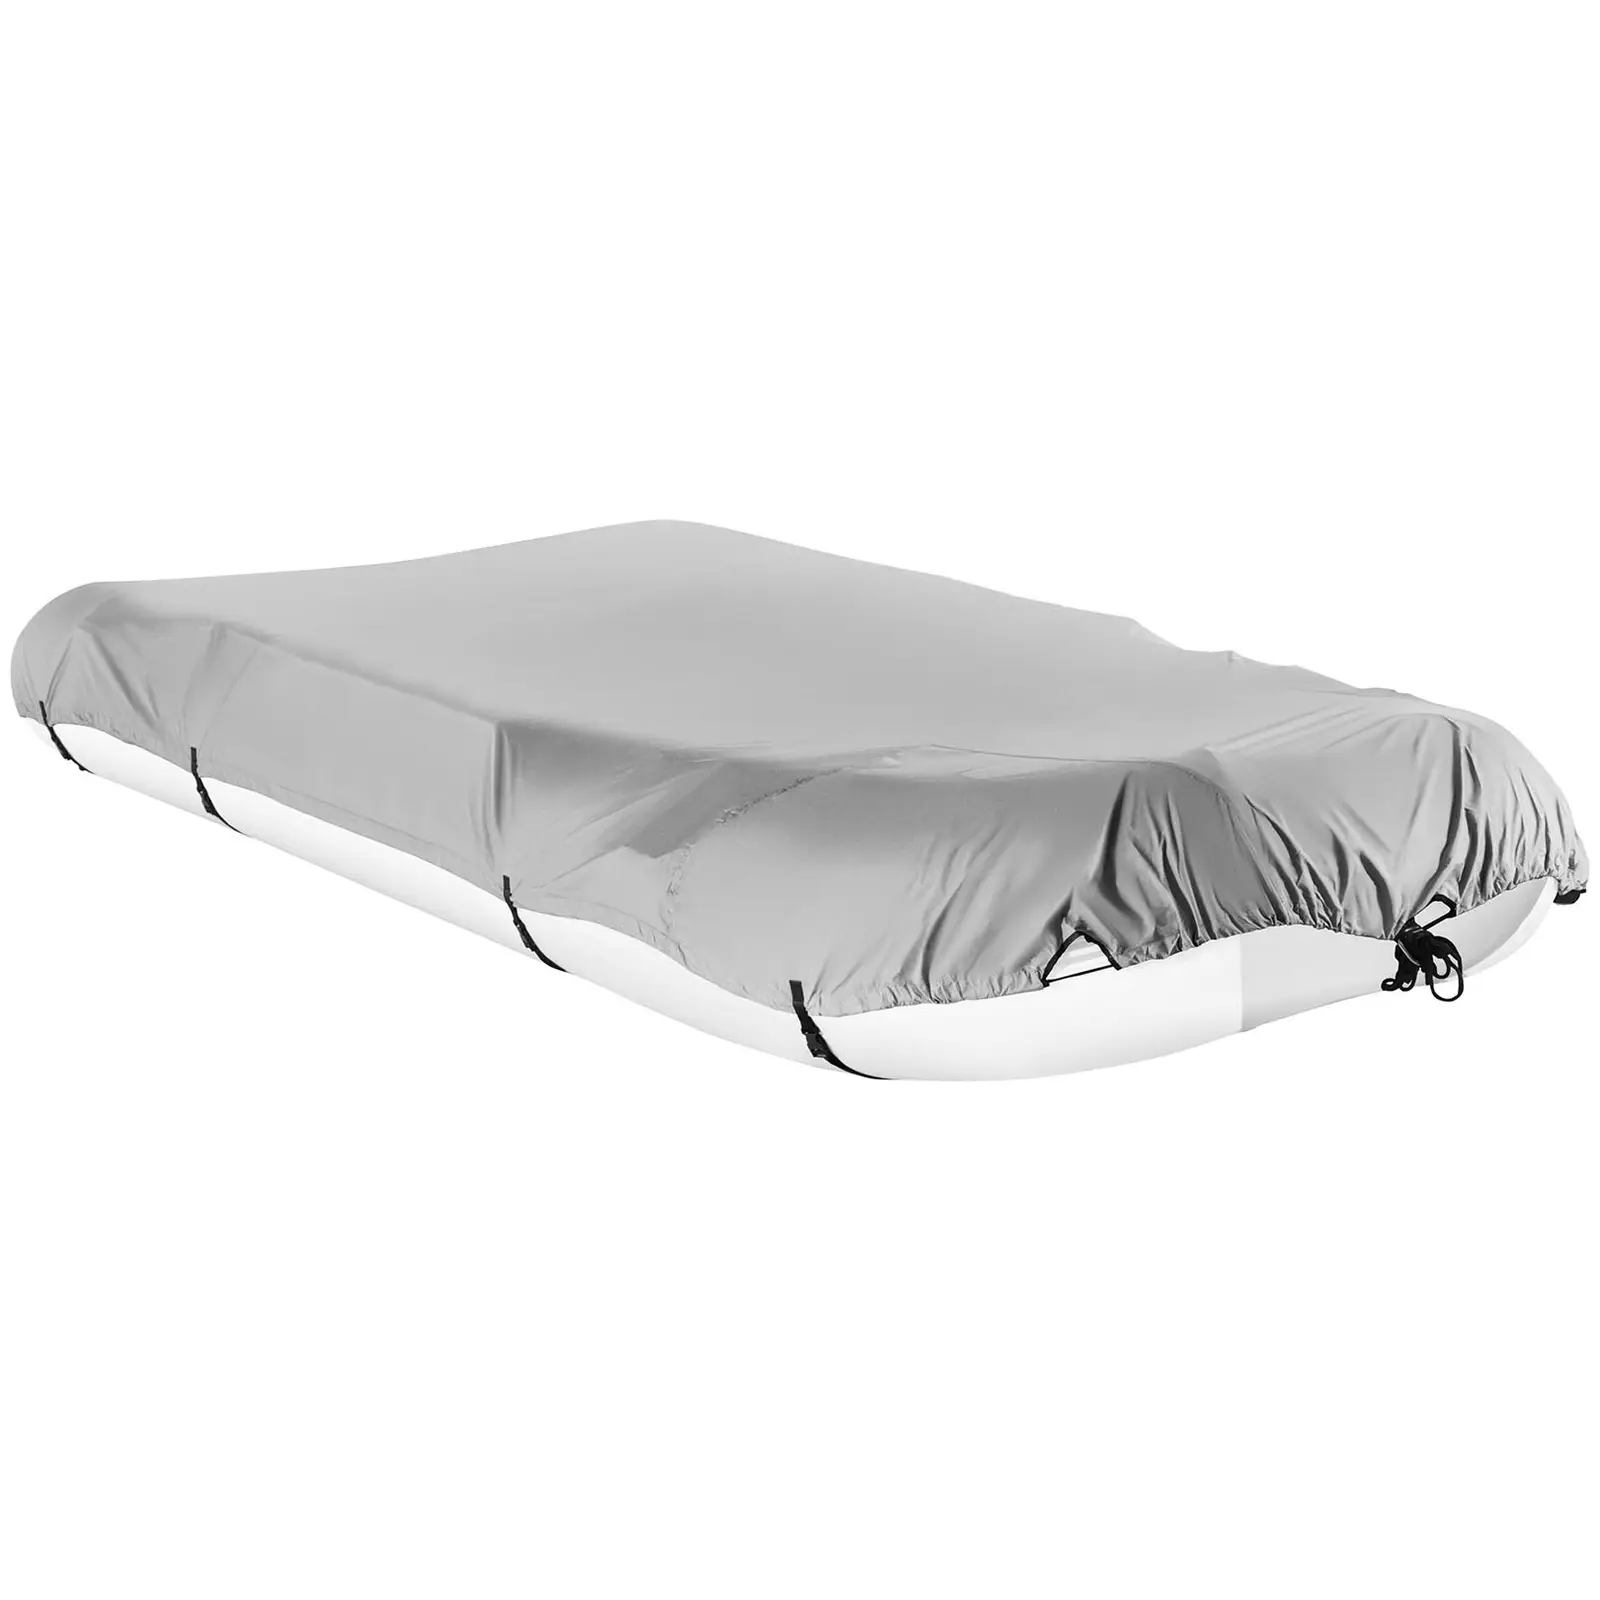 Inflatable Boat Cover - 410 x 200 x 140 cm